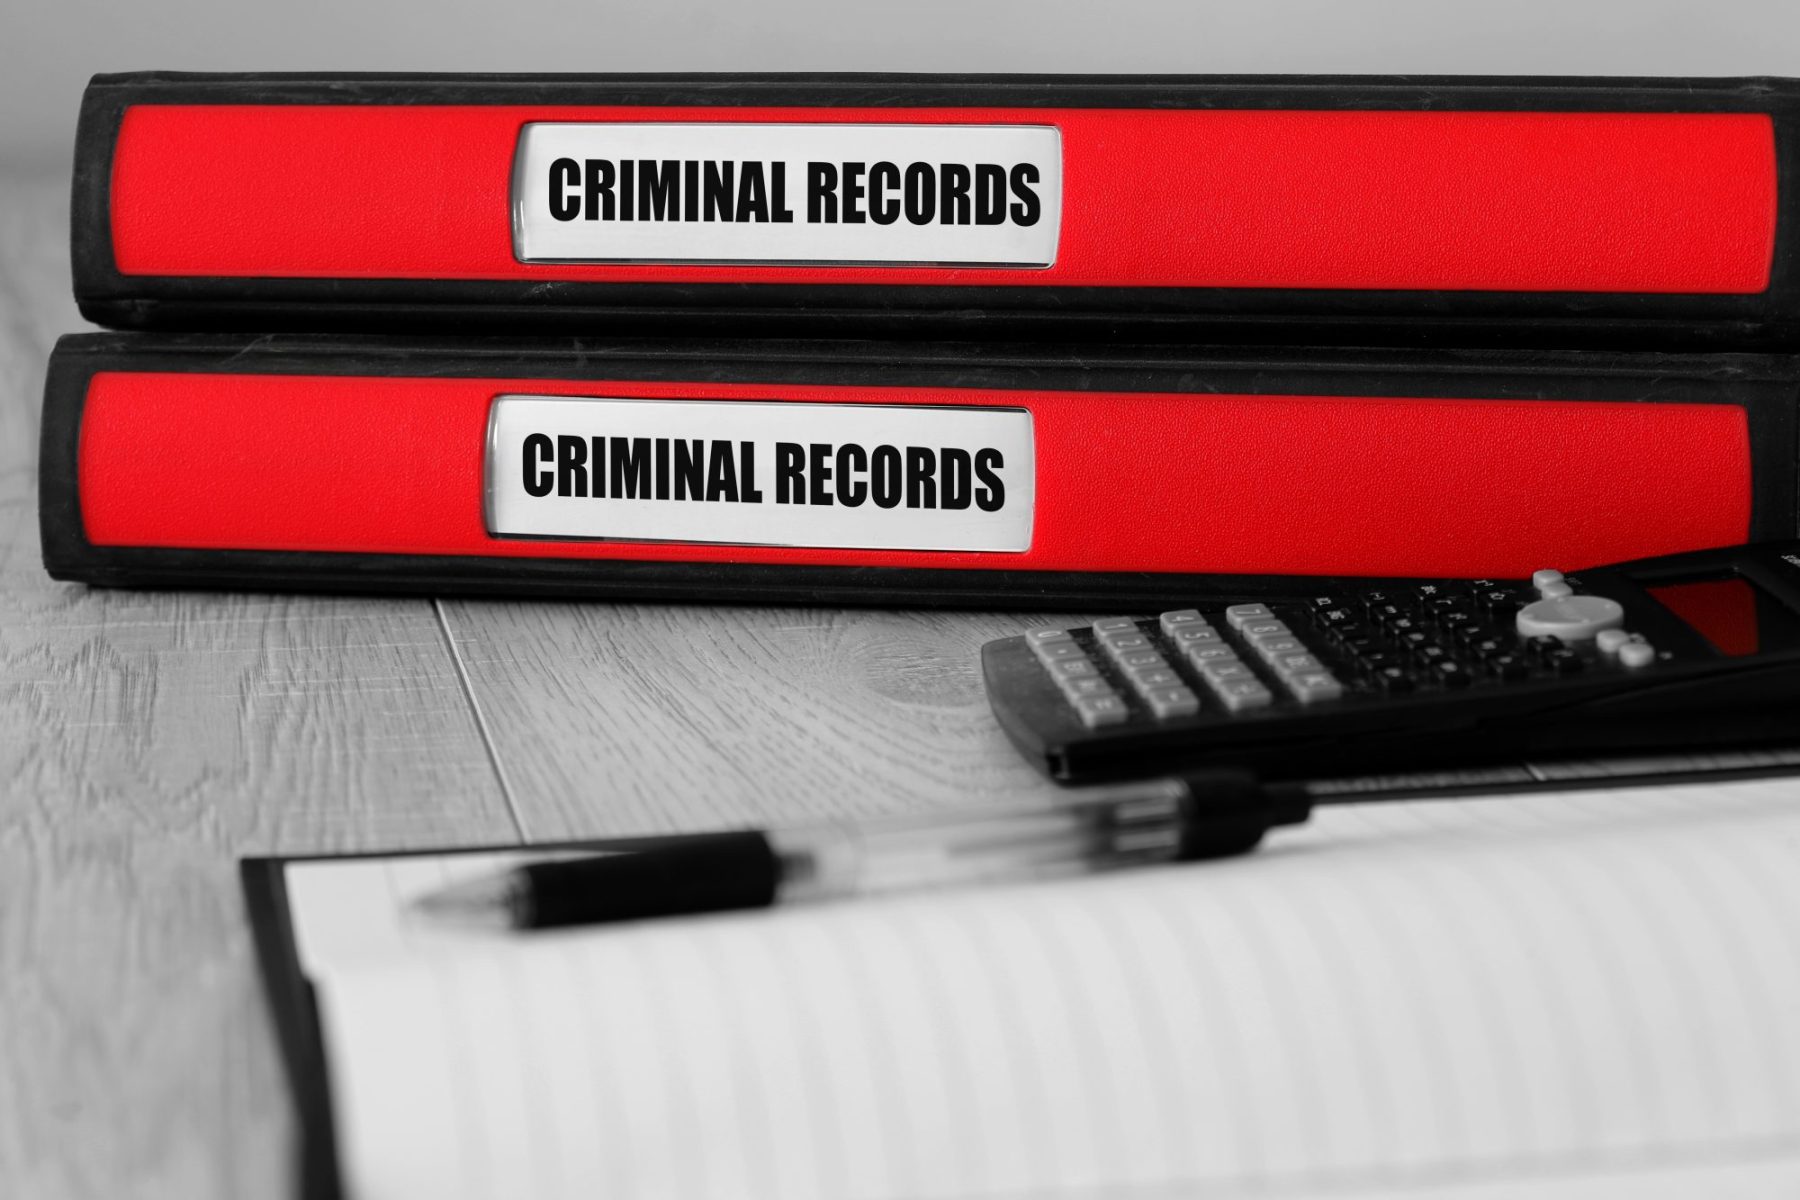 How to Expunge or Seal a Criminal Record in Ohio